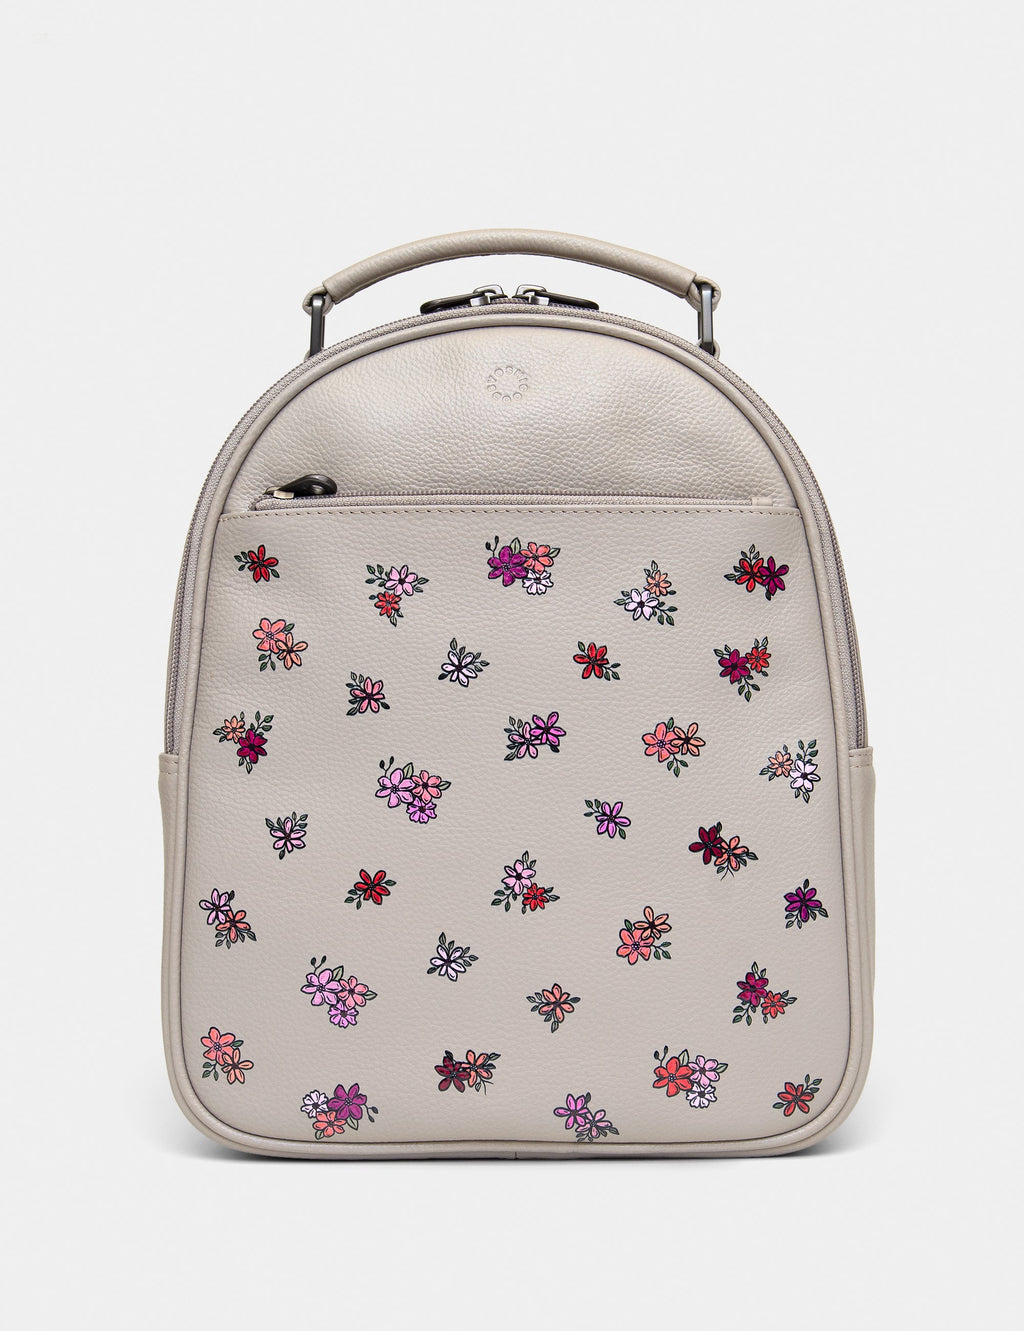 *NEW IN* Yoshi - Ditsy Floral Rucksack